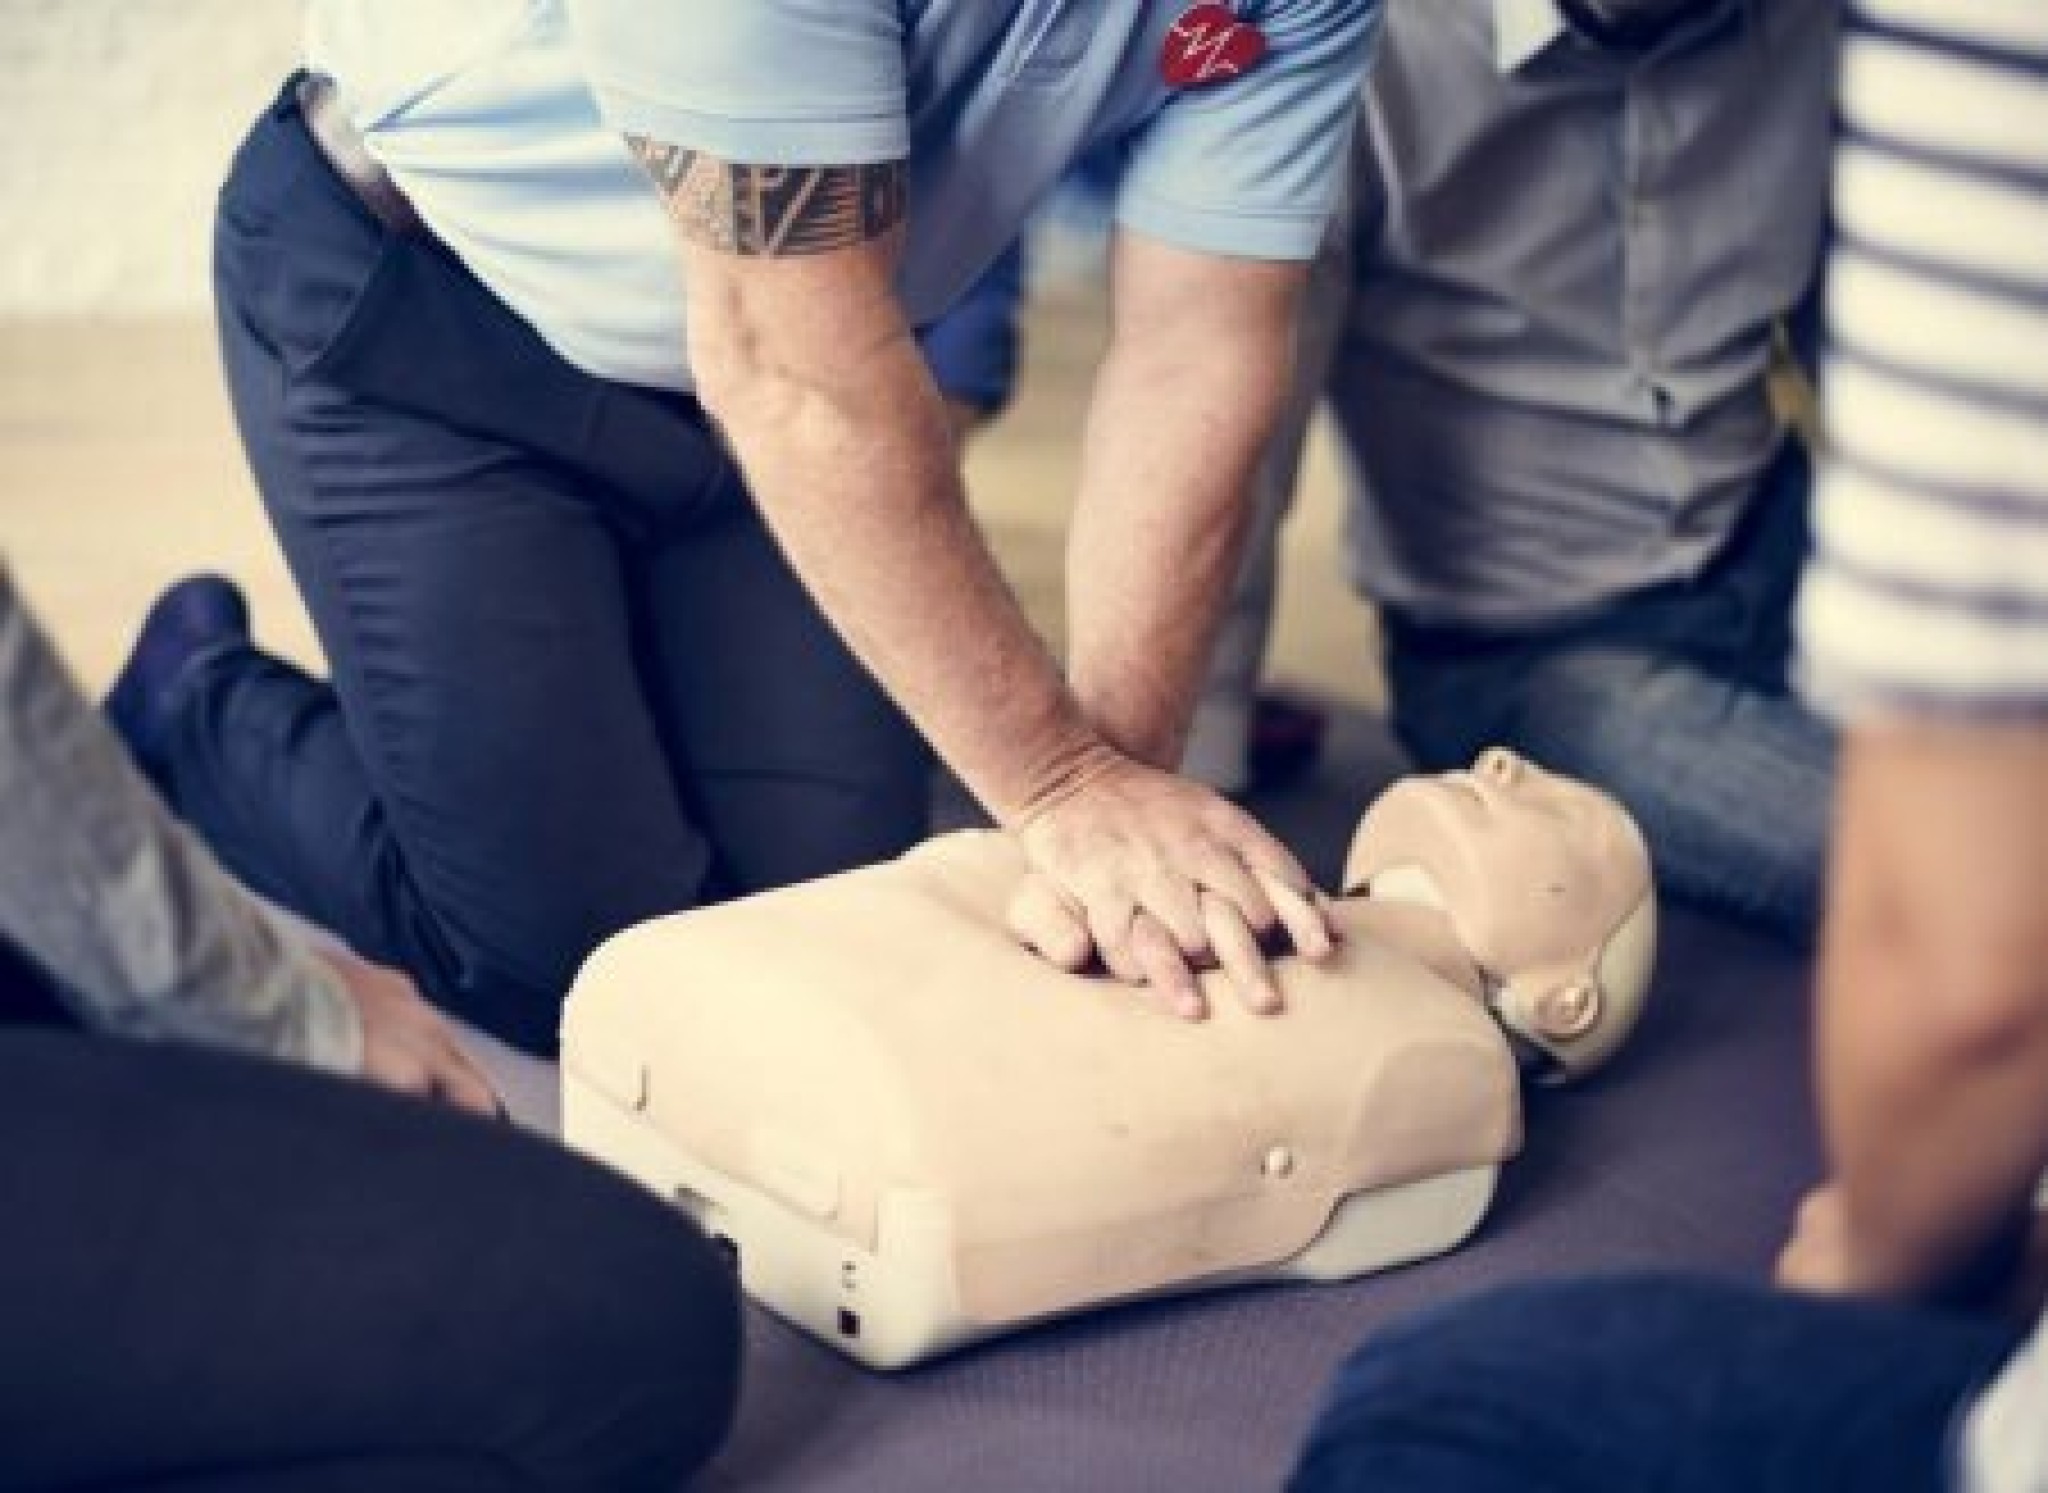 depositphotos_137514770-stock-photo-people-learning-cpr-first-aid.jpg